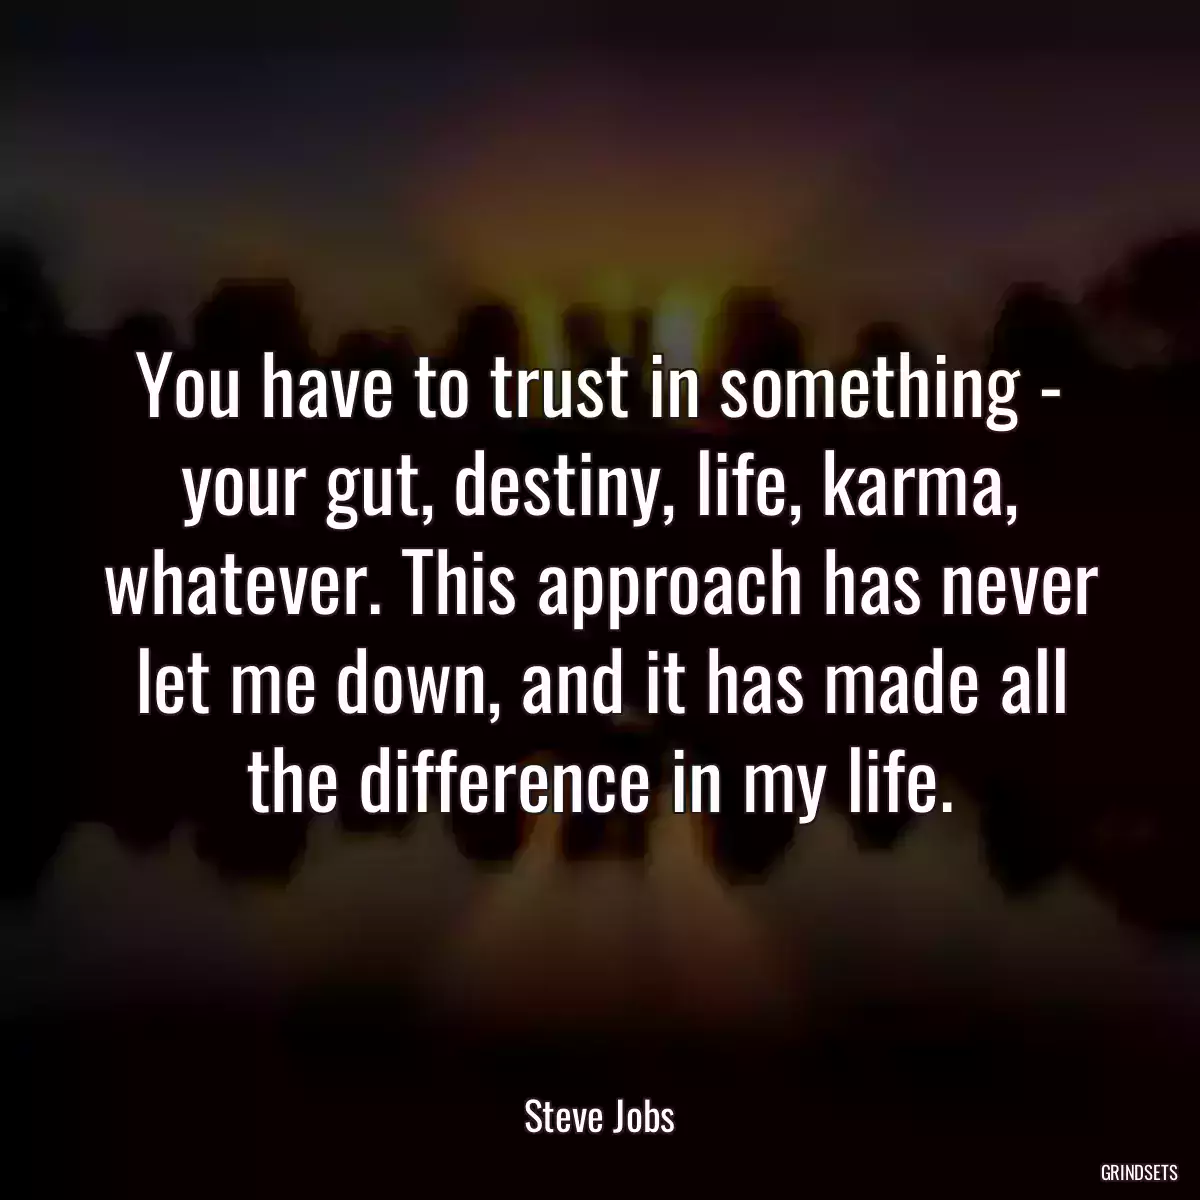 You have to trust in something - your gut, destiny, life, karma, whatever. This approach has never let me down, and it has made all the difference in my life.